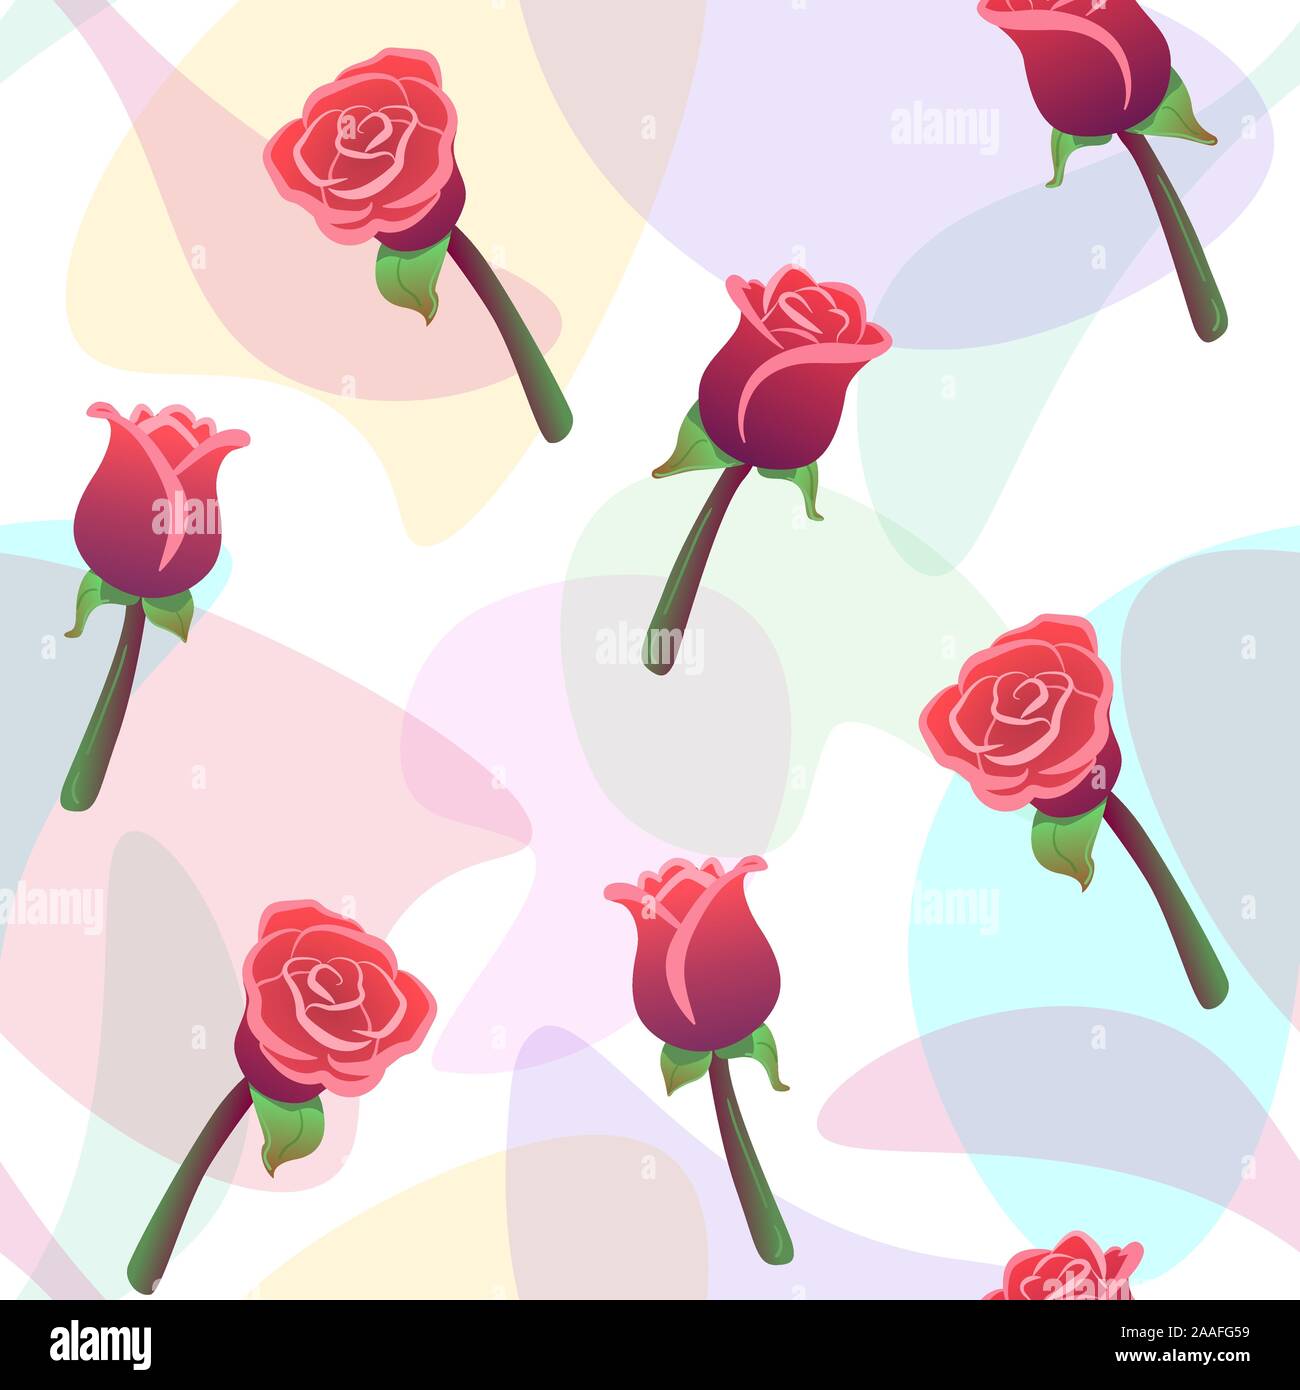 Red roses seamless pattern with color drops white background. Love, romantic, floral ornament. Wedding nature vector repeating print. Flower wallpaper, fashion textile texture. Watercolor light effect Stock Vector